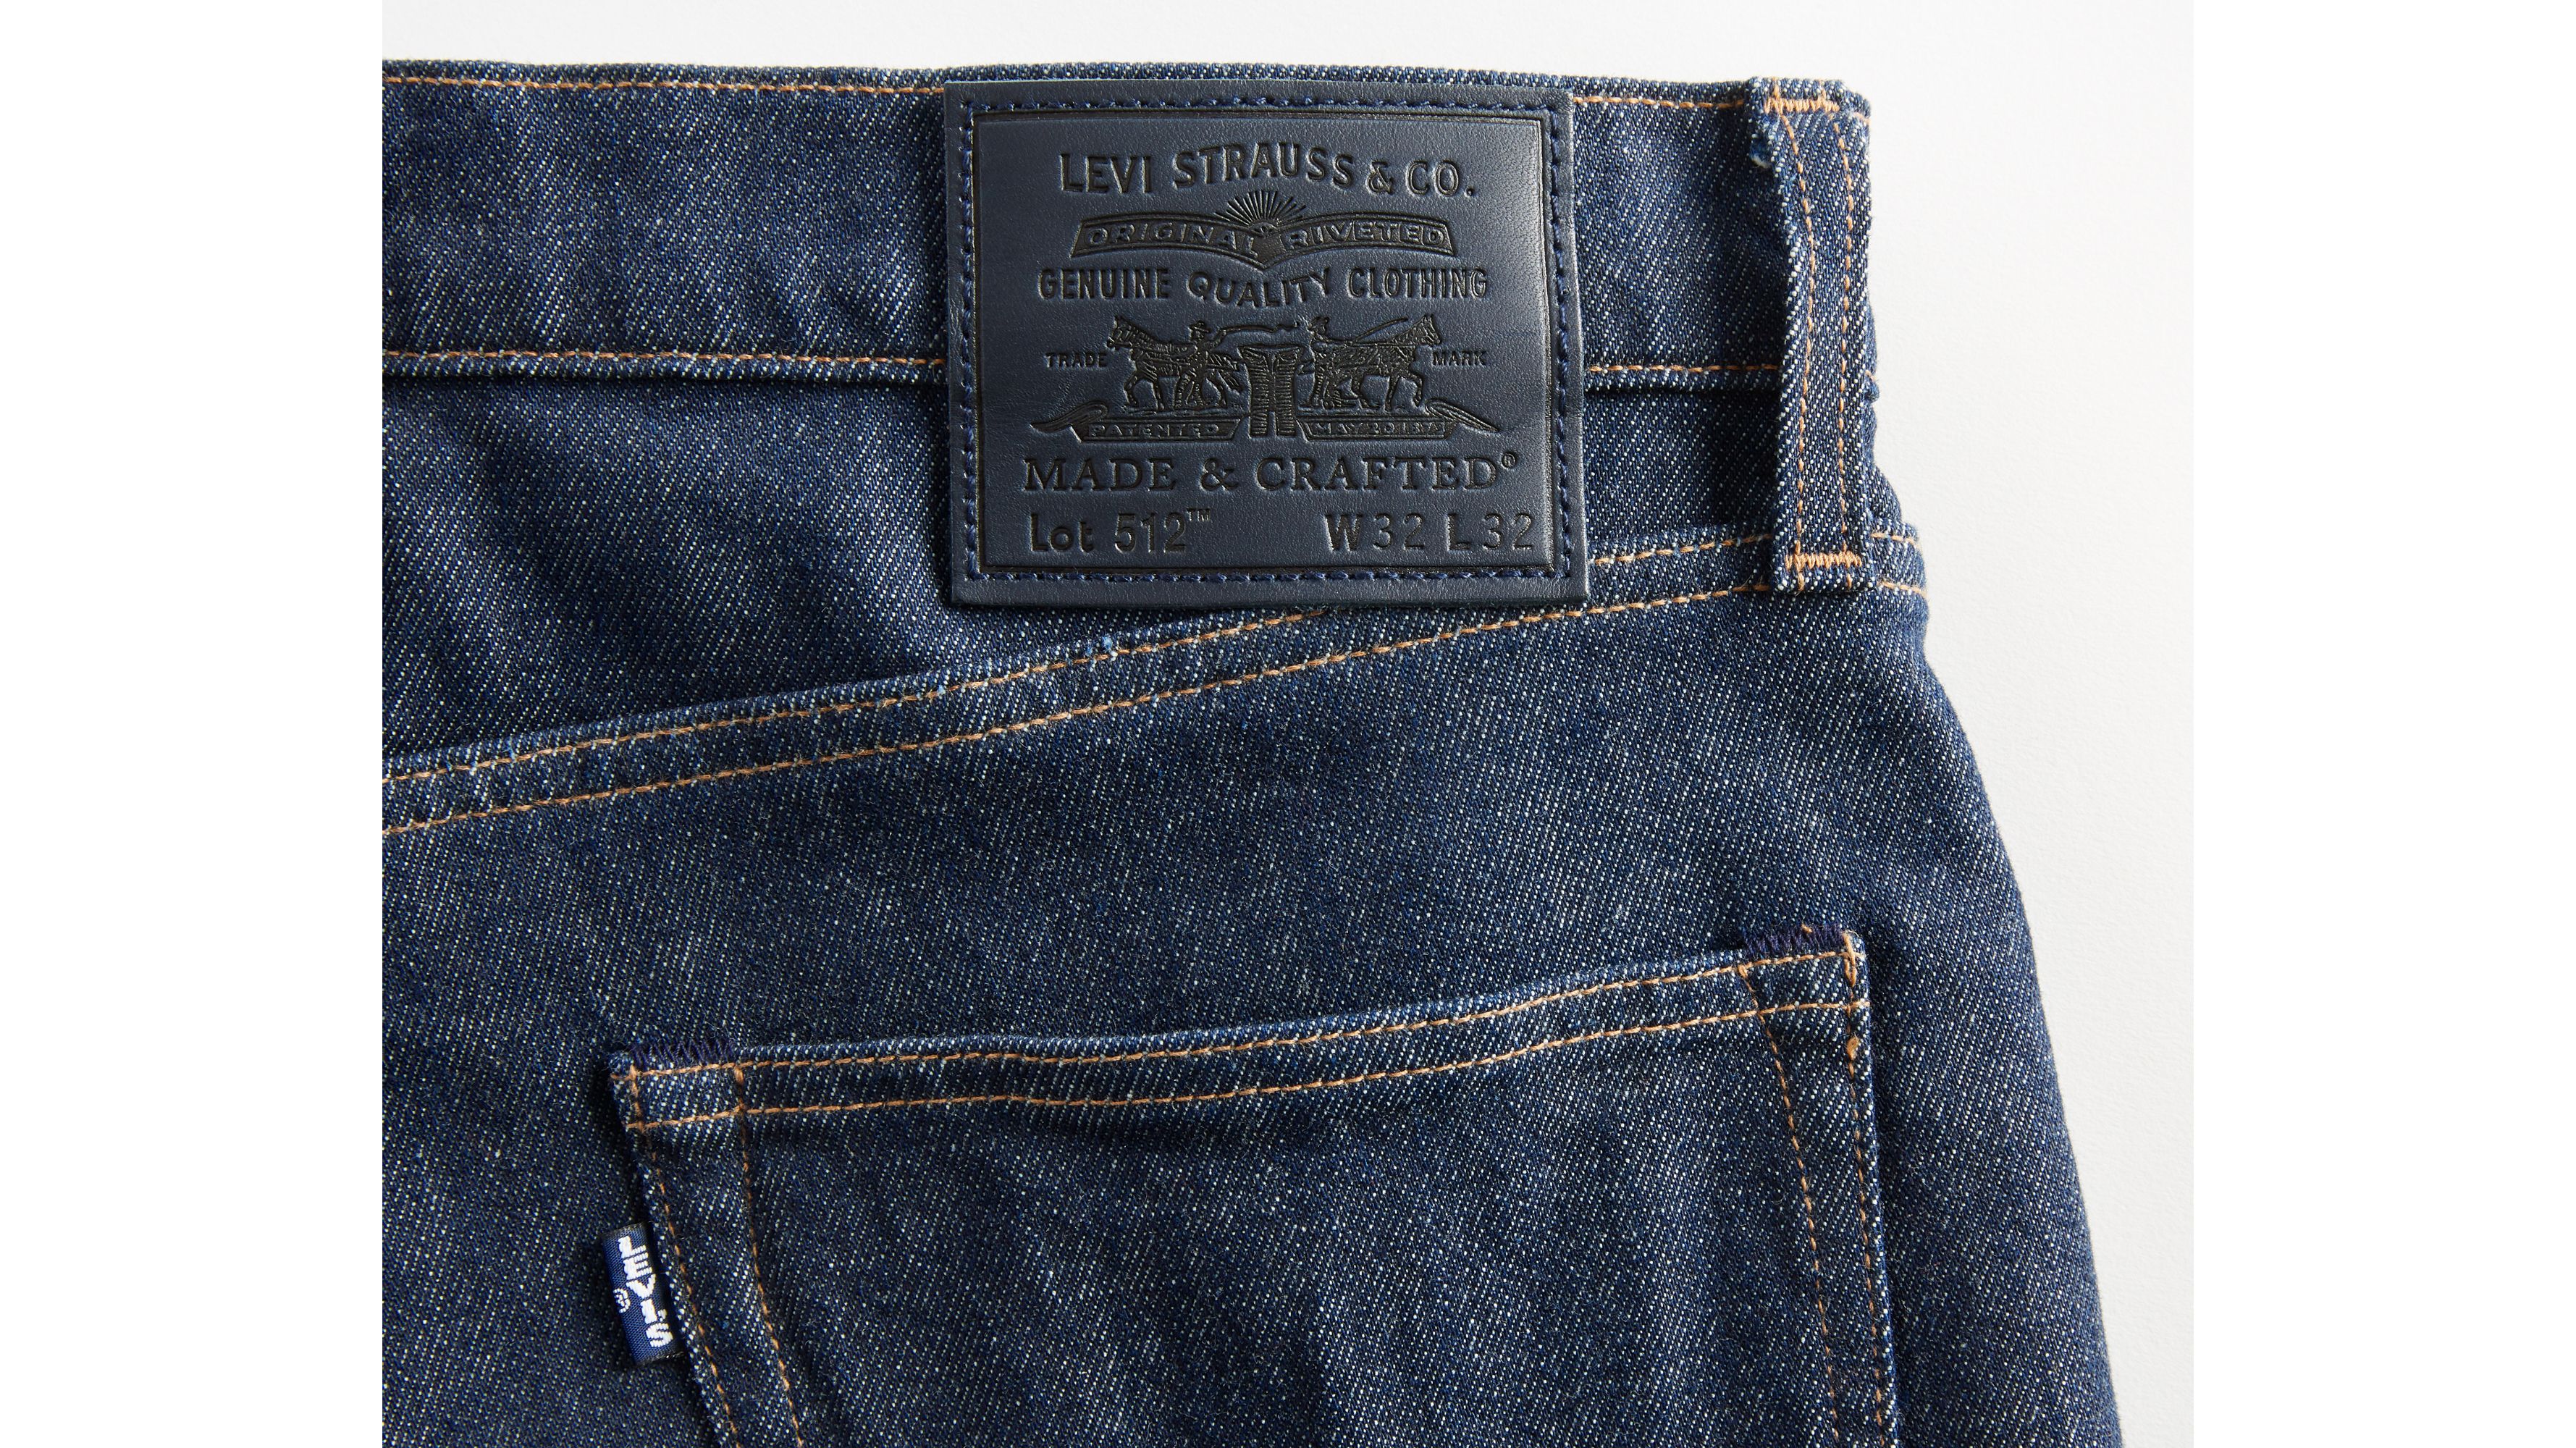 levis made in crafted